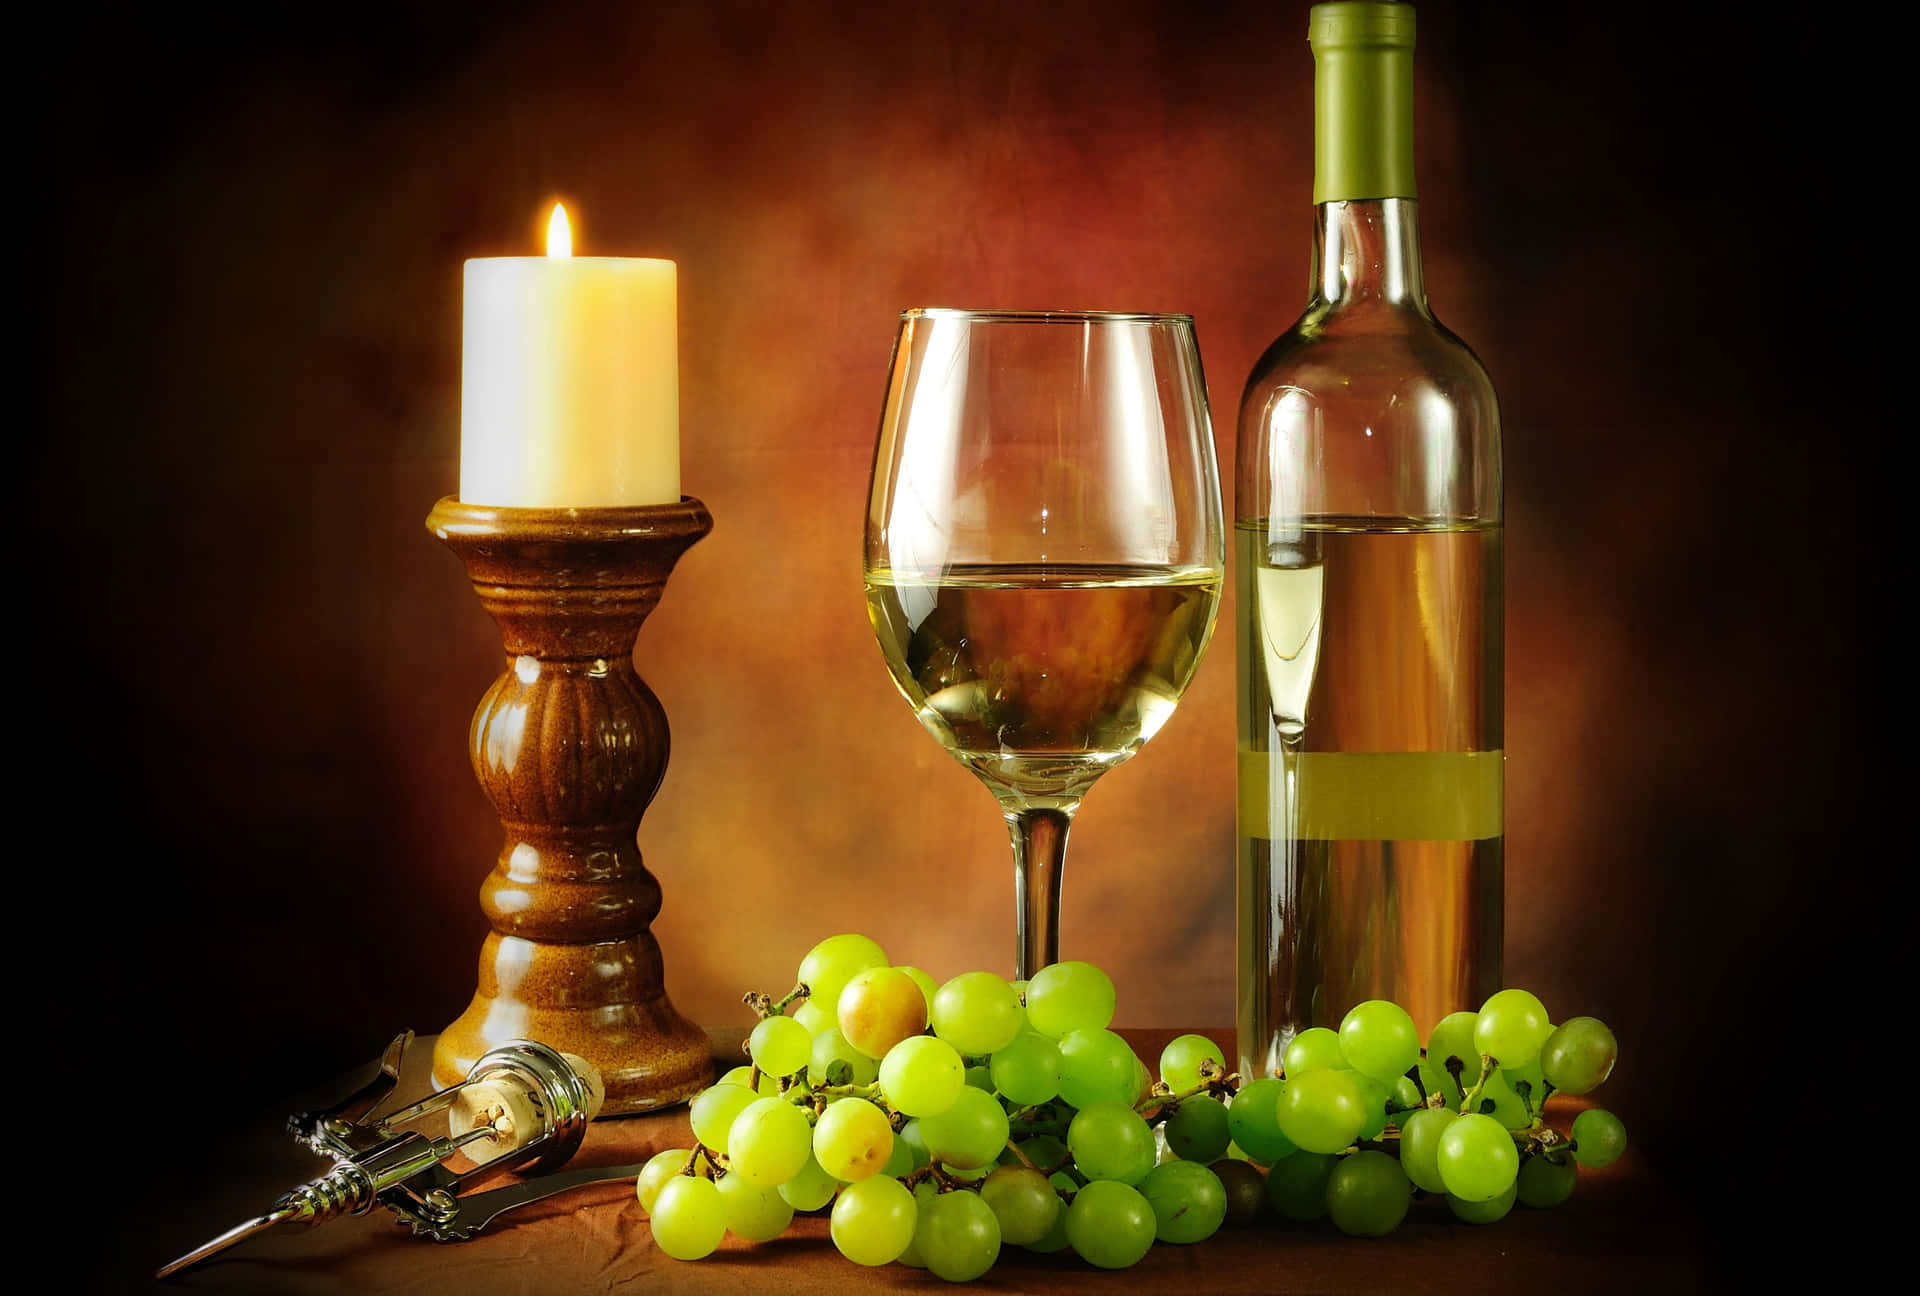 A chilled glass of white wine surrounded by bunches of green and yellow grapes. Wallpaper